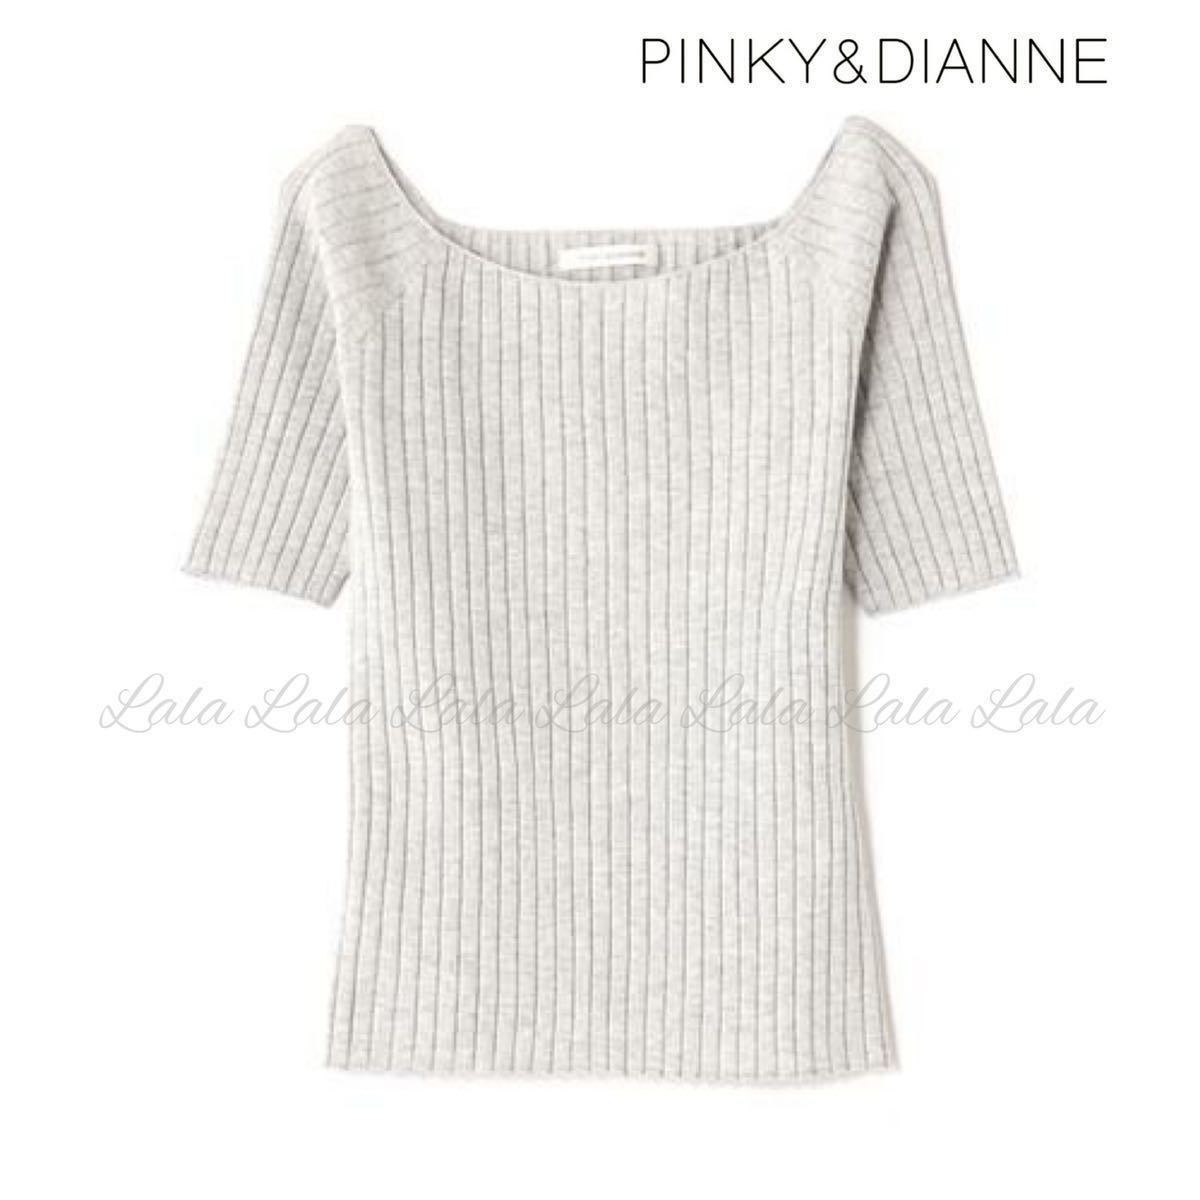 PINKY&DIANNE Pinky & Diane knitted sweater tops short sleeves knitted rib knitted gray lady's off shoulder cut and sewn 